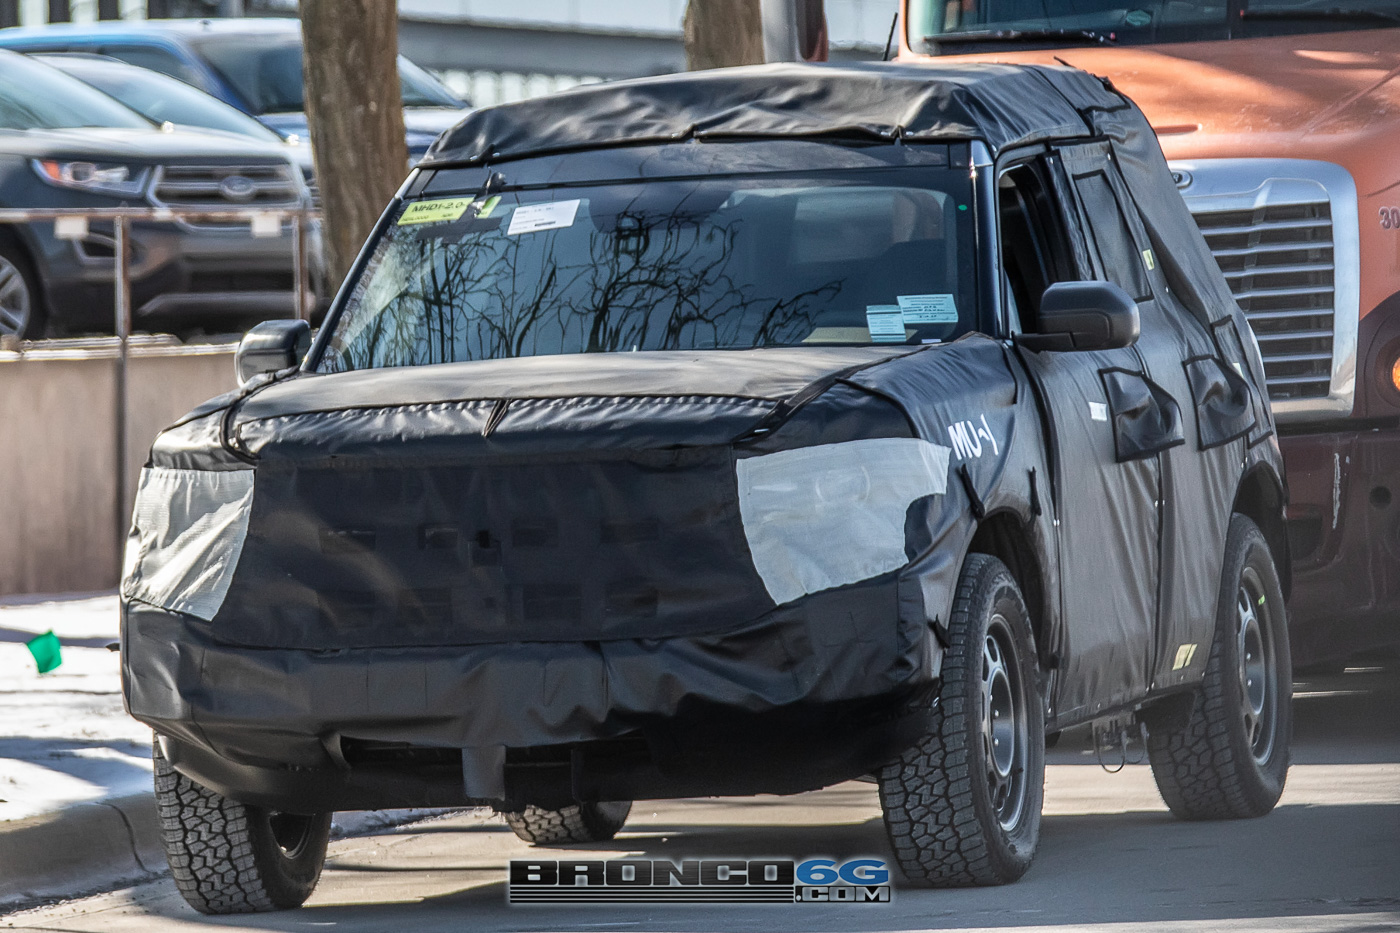 Ford Bronco 2021 Bronco Sport Spied With New Camo Suit 2021-Bronco-Sport-Baby-Bronco-Spied-4